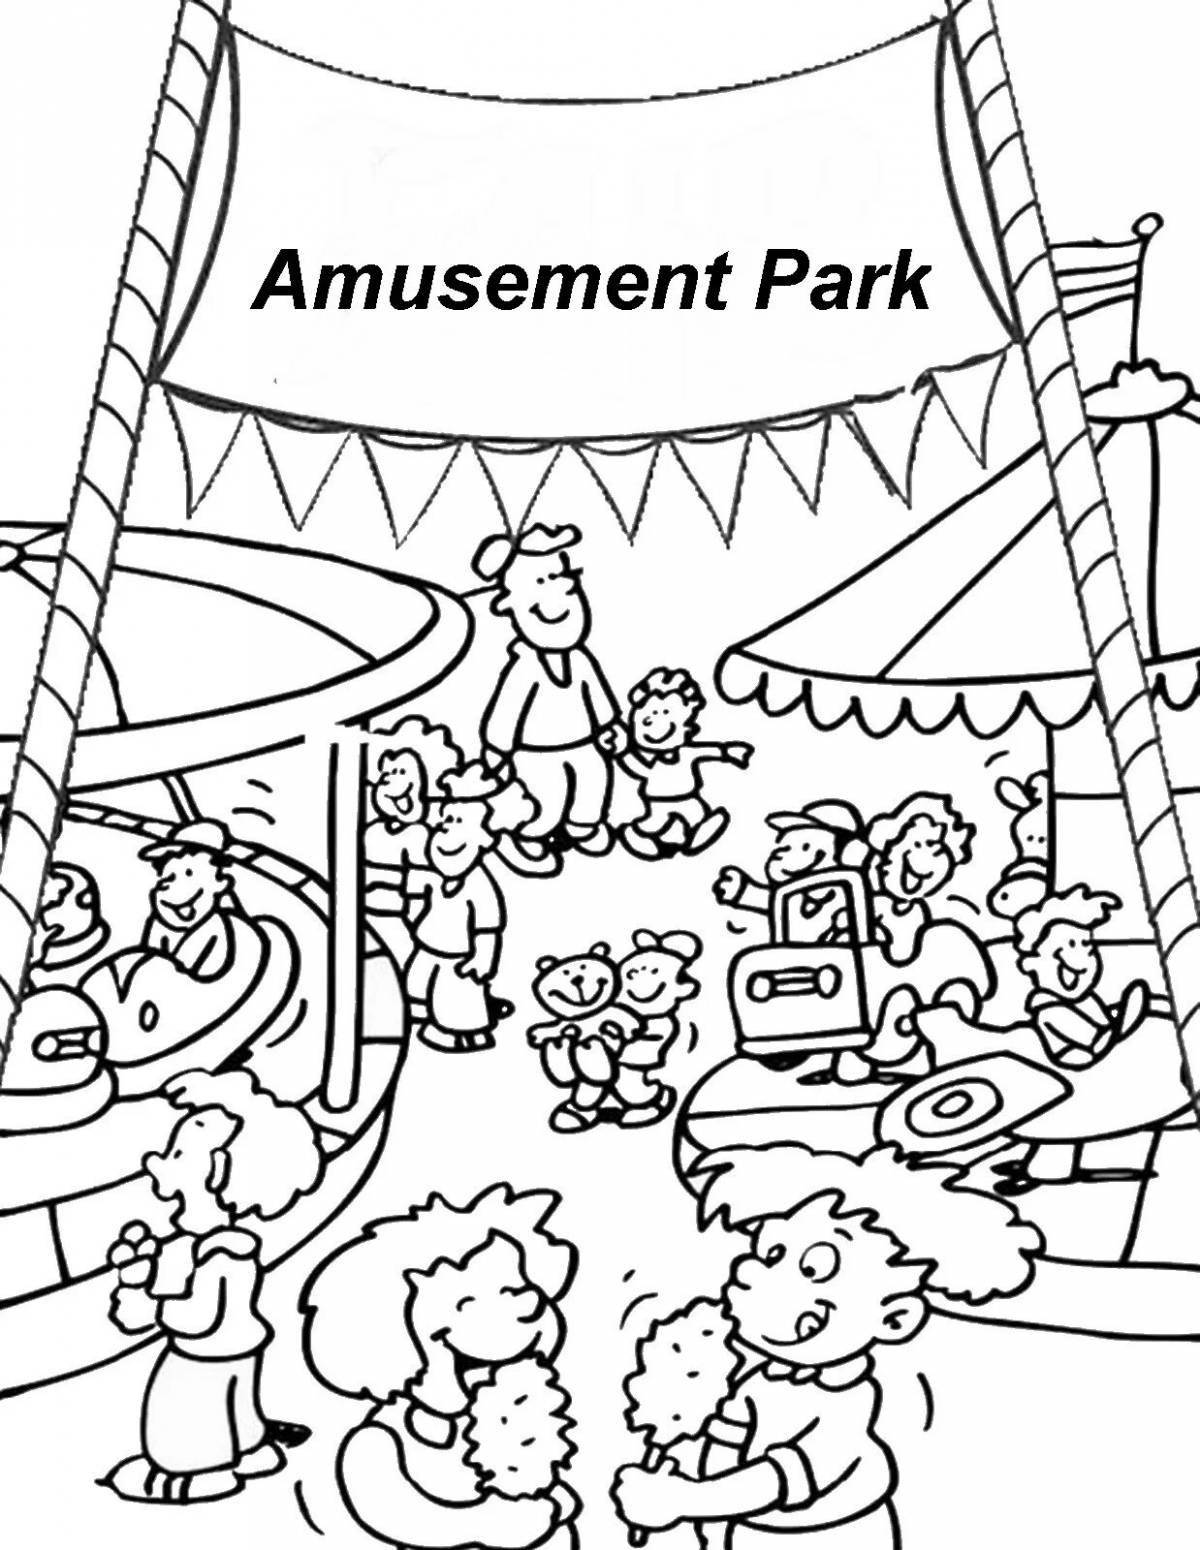 Fairytale park coloring pages for kids